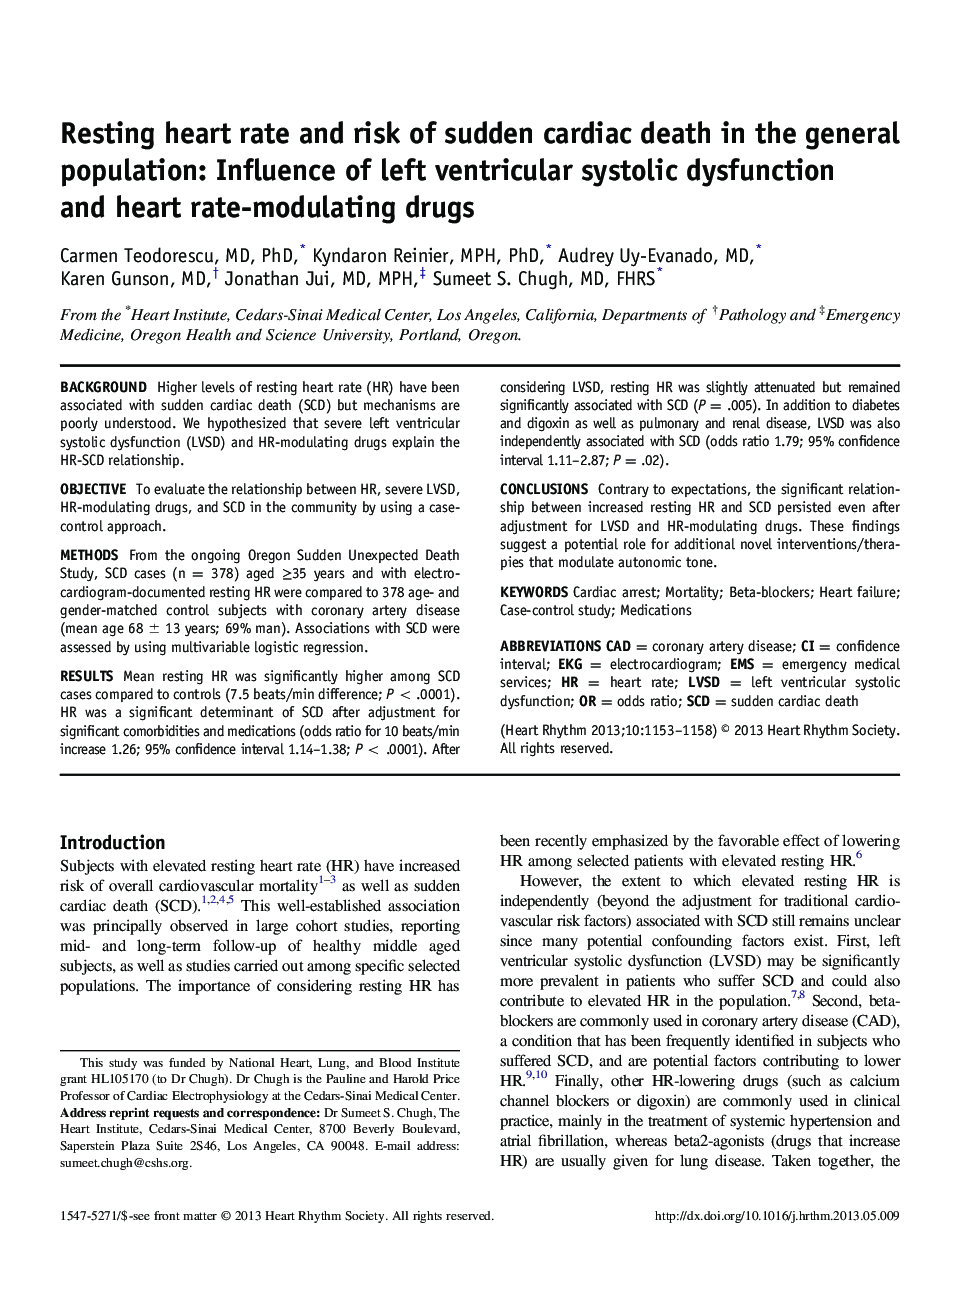 Resting heart rate and risk of sudden cardiac death in the general population: Influence of left ventricular systolic dysfunction and heart rate-modulating drugs